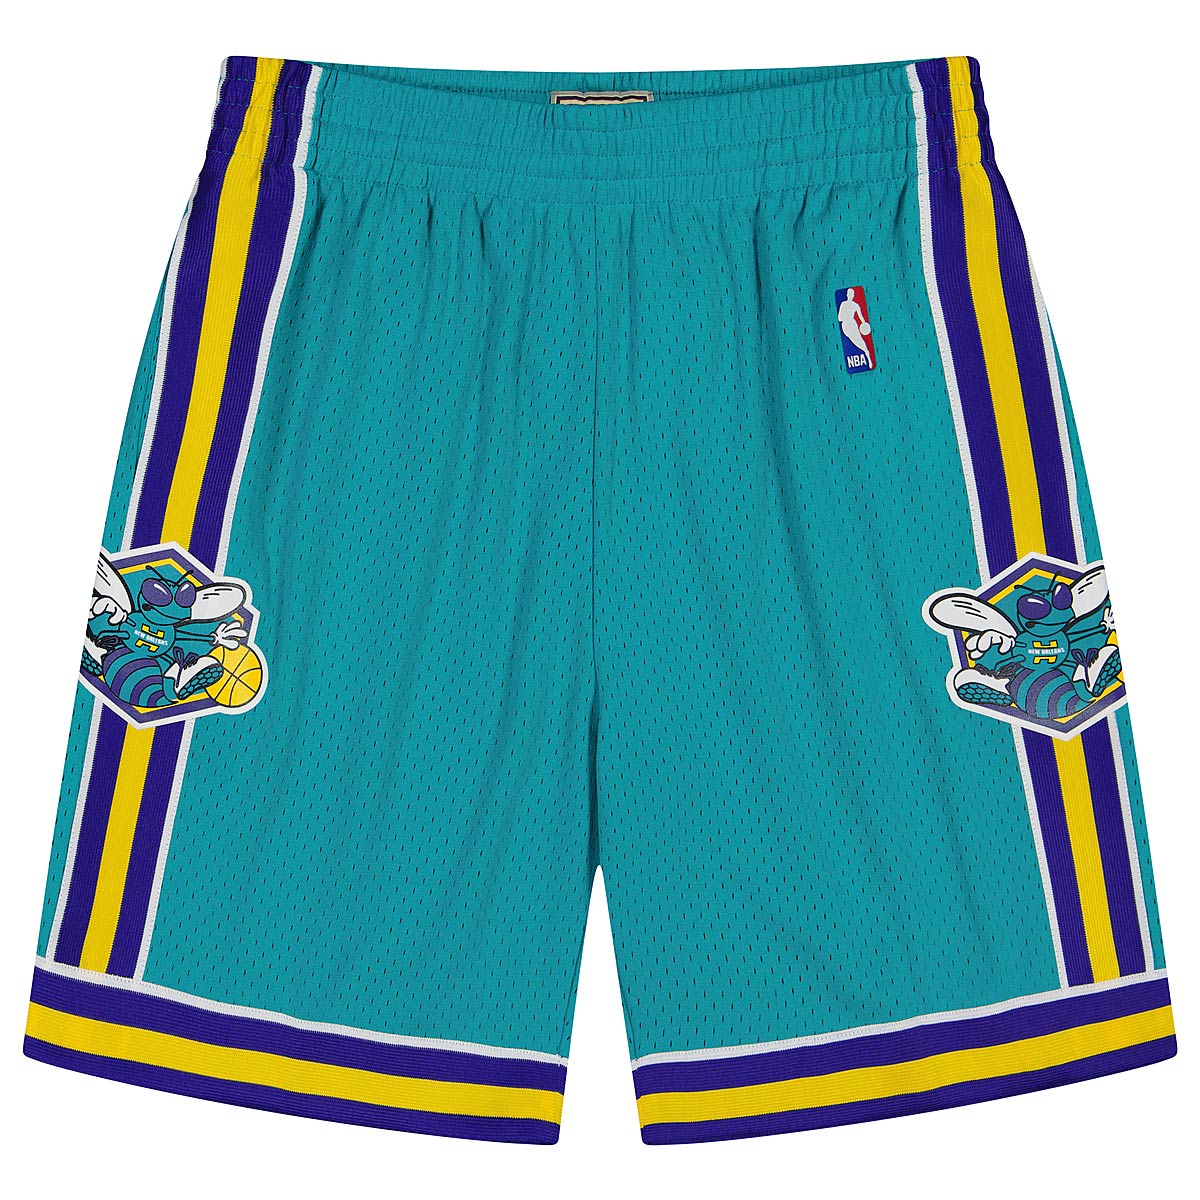 Mitchell And Ness Nba New Orleans Hornets Swingman Shorts, Teal